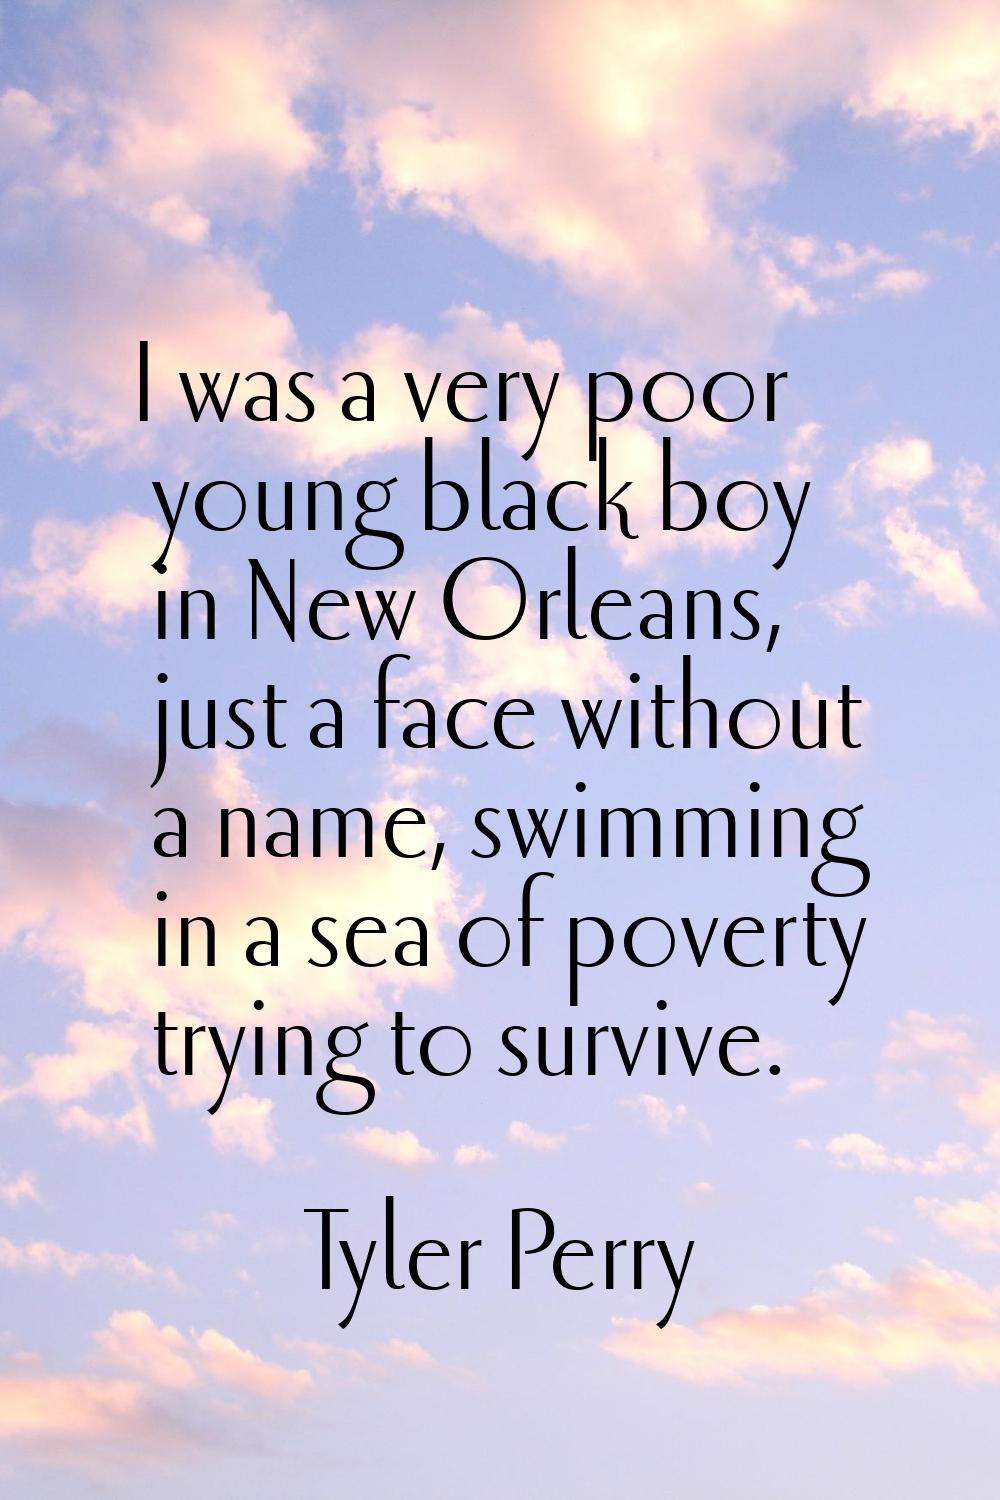 I was a very poor young black boy in New Orleans, just a face without a name, swimming in a sea of 